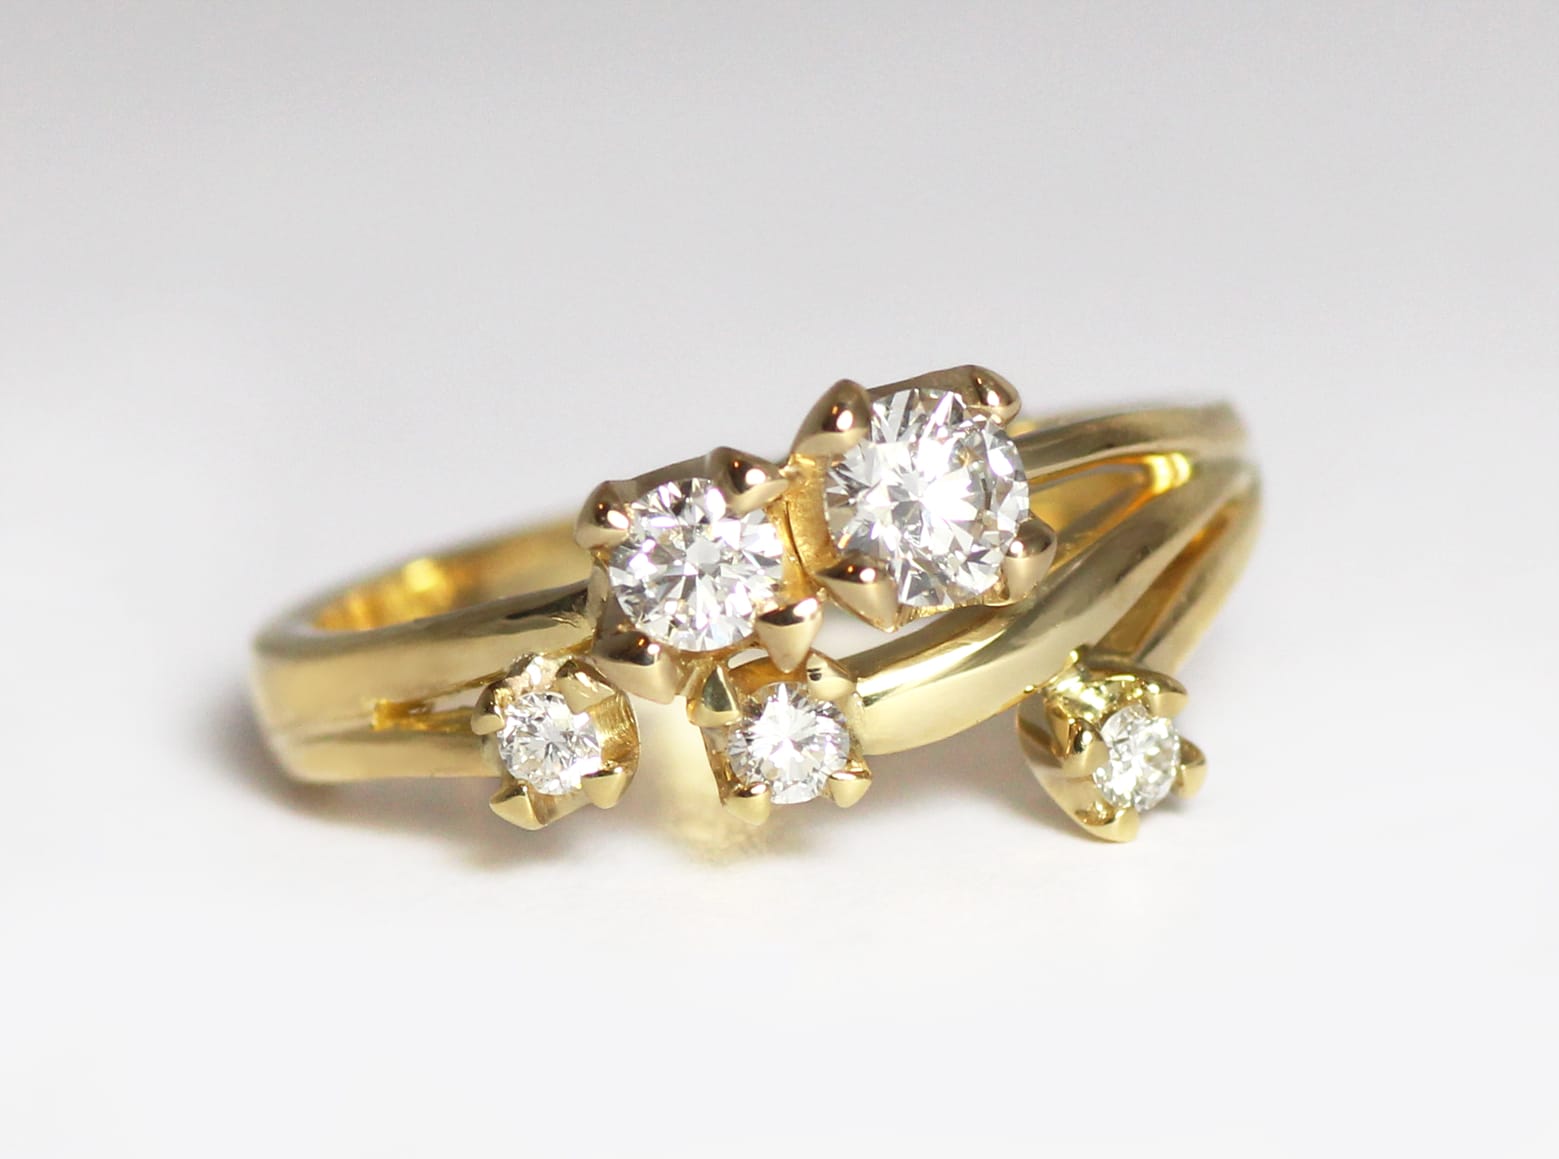 Diamonds in 18ct Fairtrade yellow gold unique engagement ring